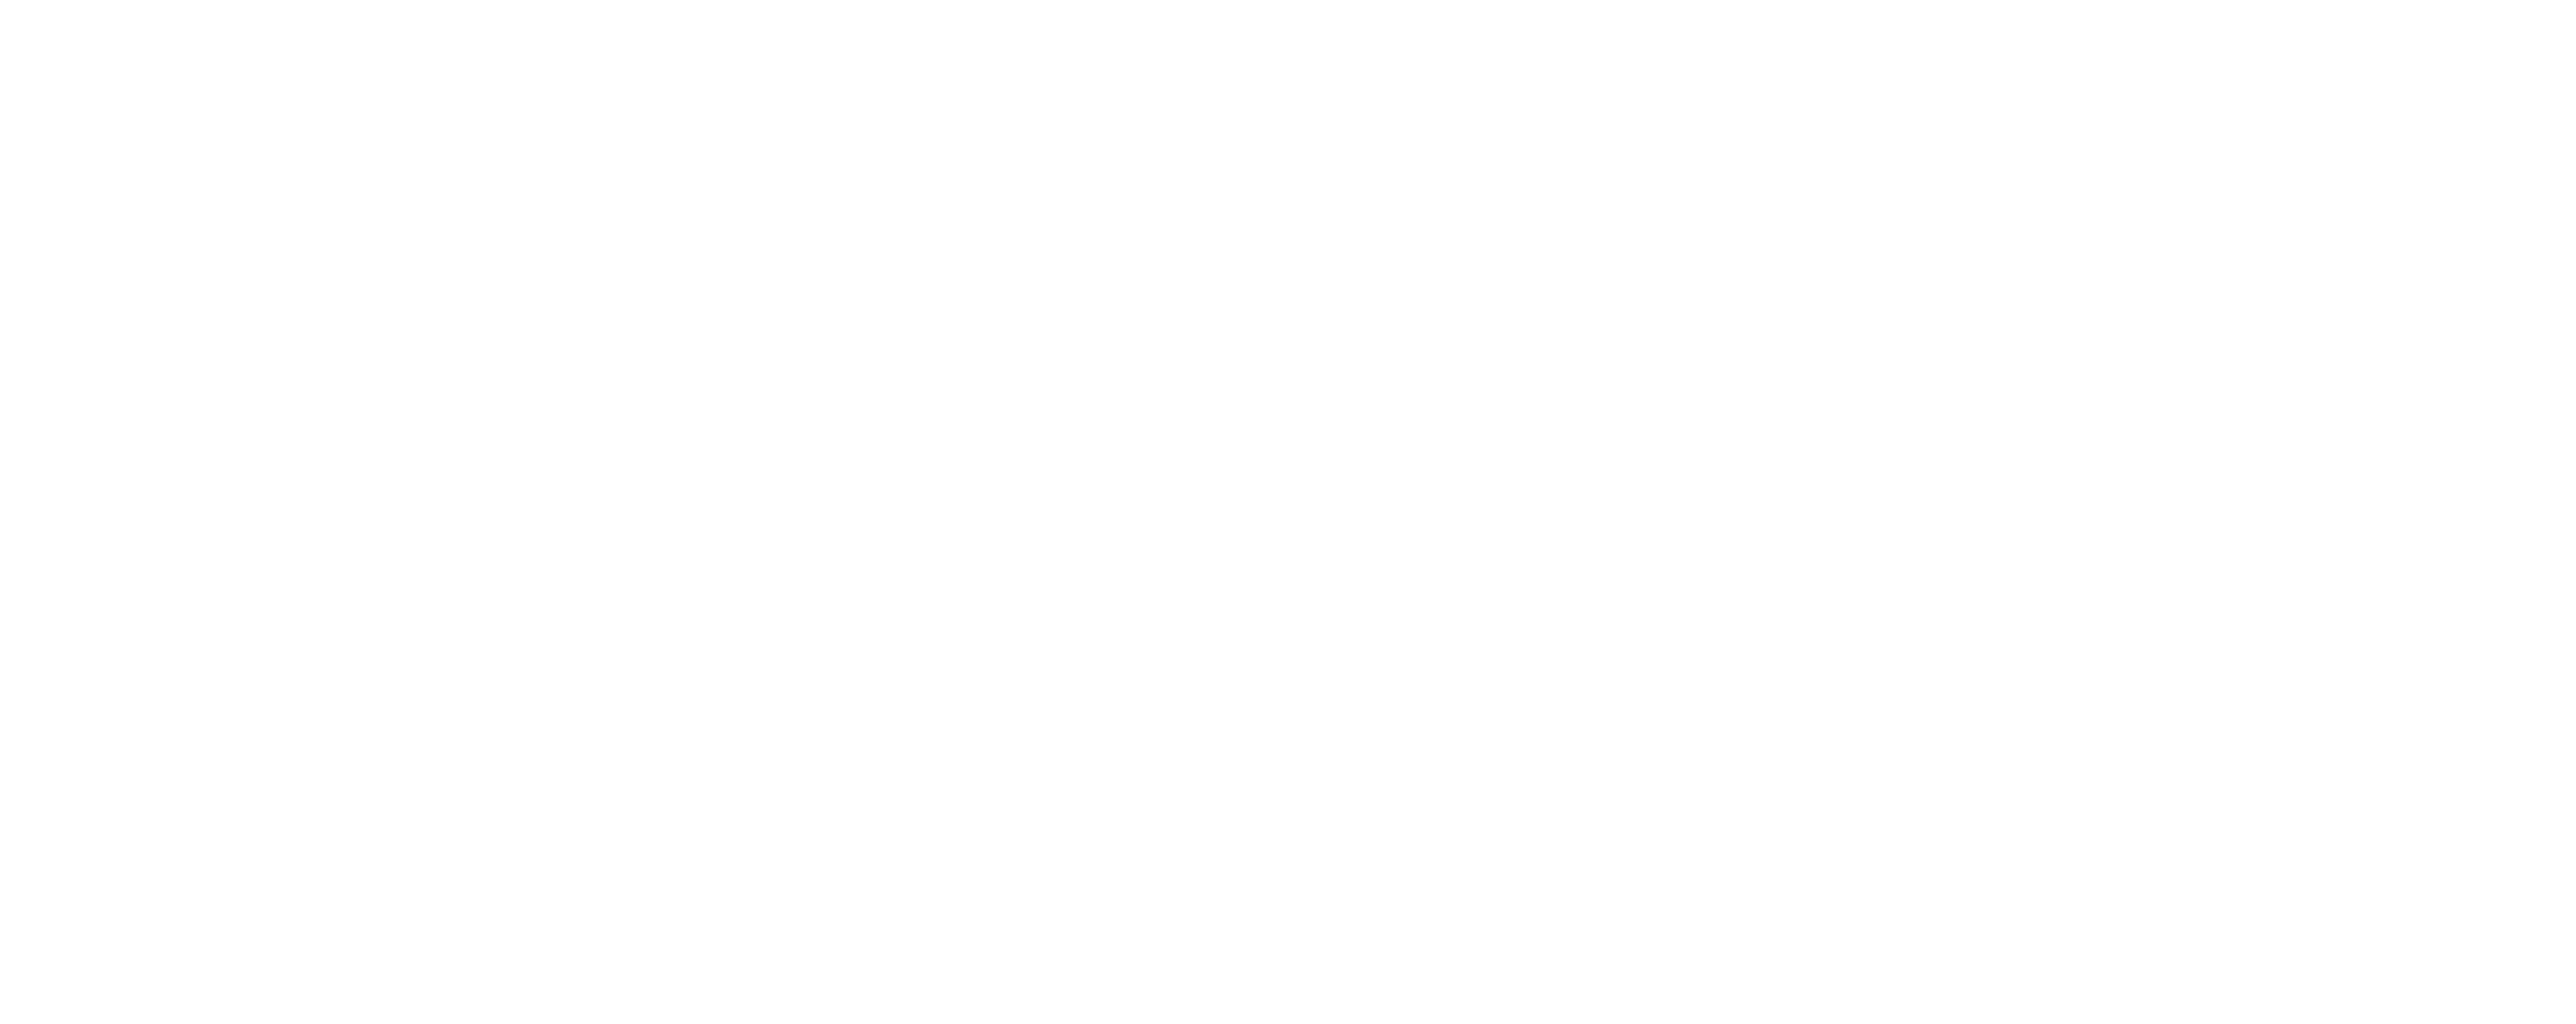 Black And White Product Pattern White Deco Lace Transparent Png Clip Art Image Png Download 8000 3180 Free Transparent Black And White Png Download Clip Art Library